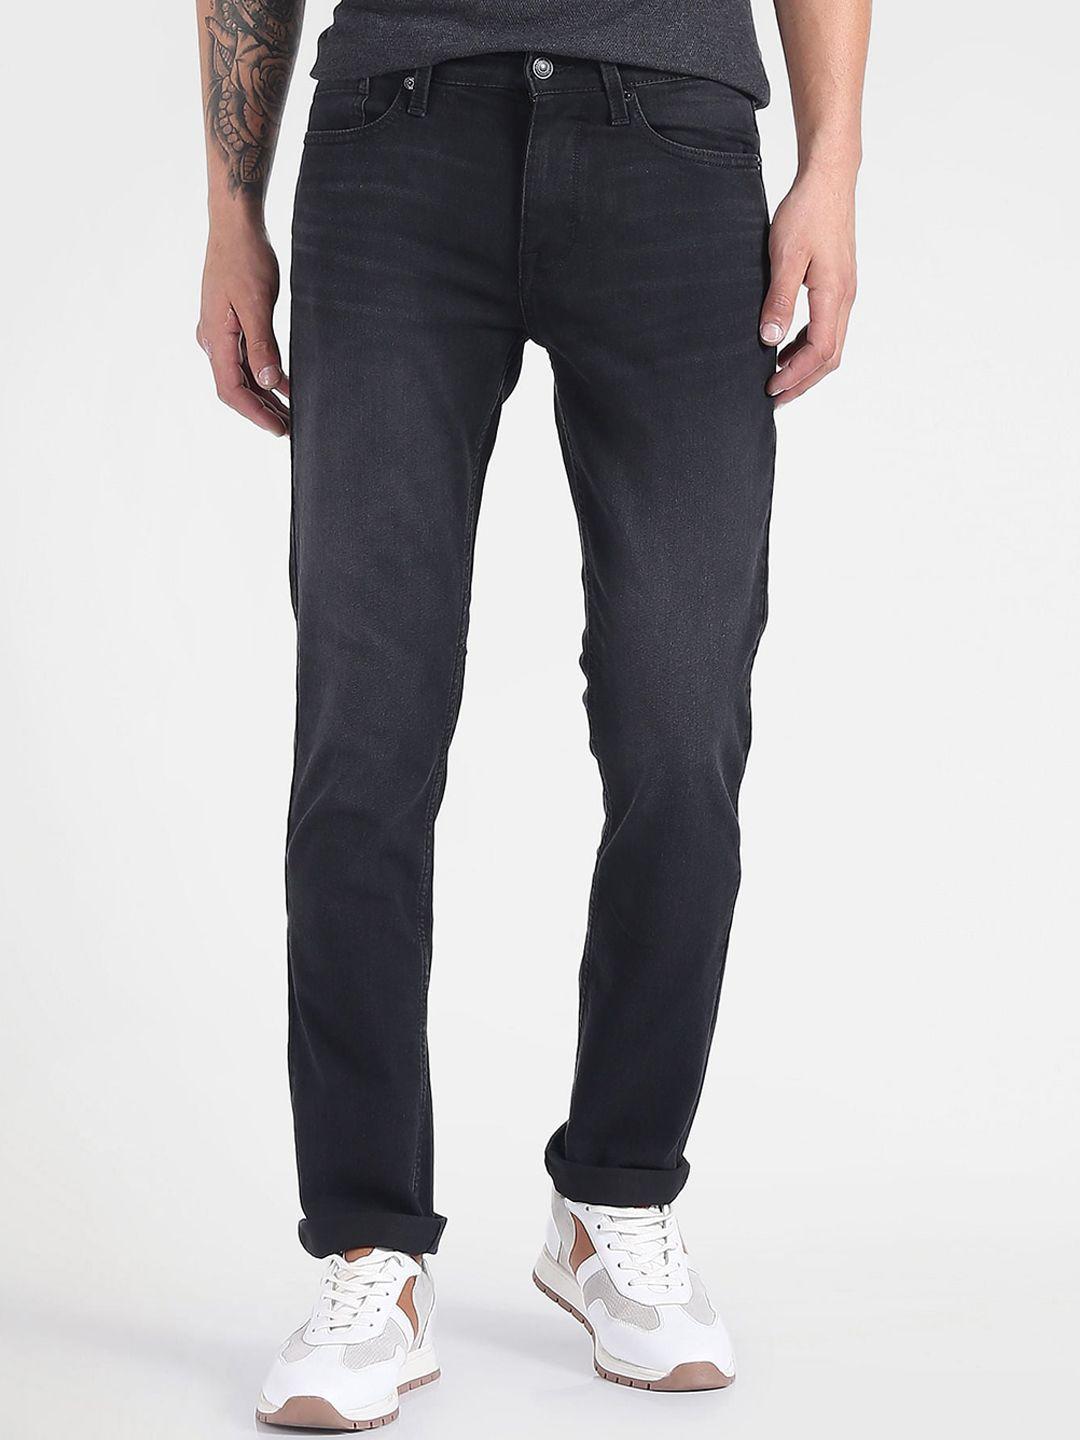 flying-machine-men-straight-fit-light-fade-clean-look-stretchable-jeans